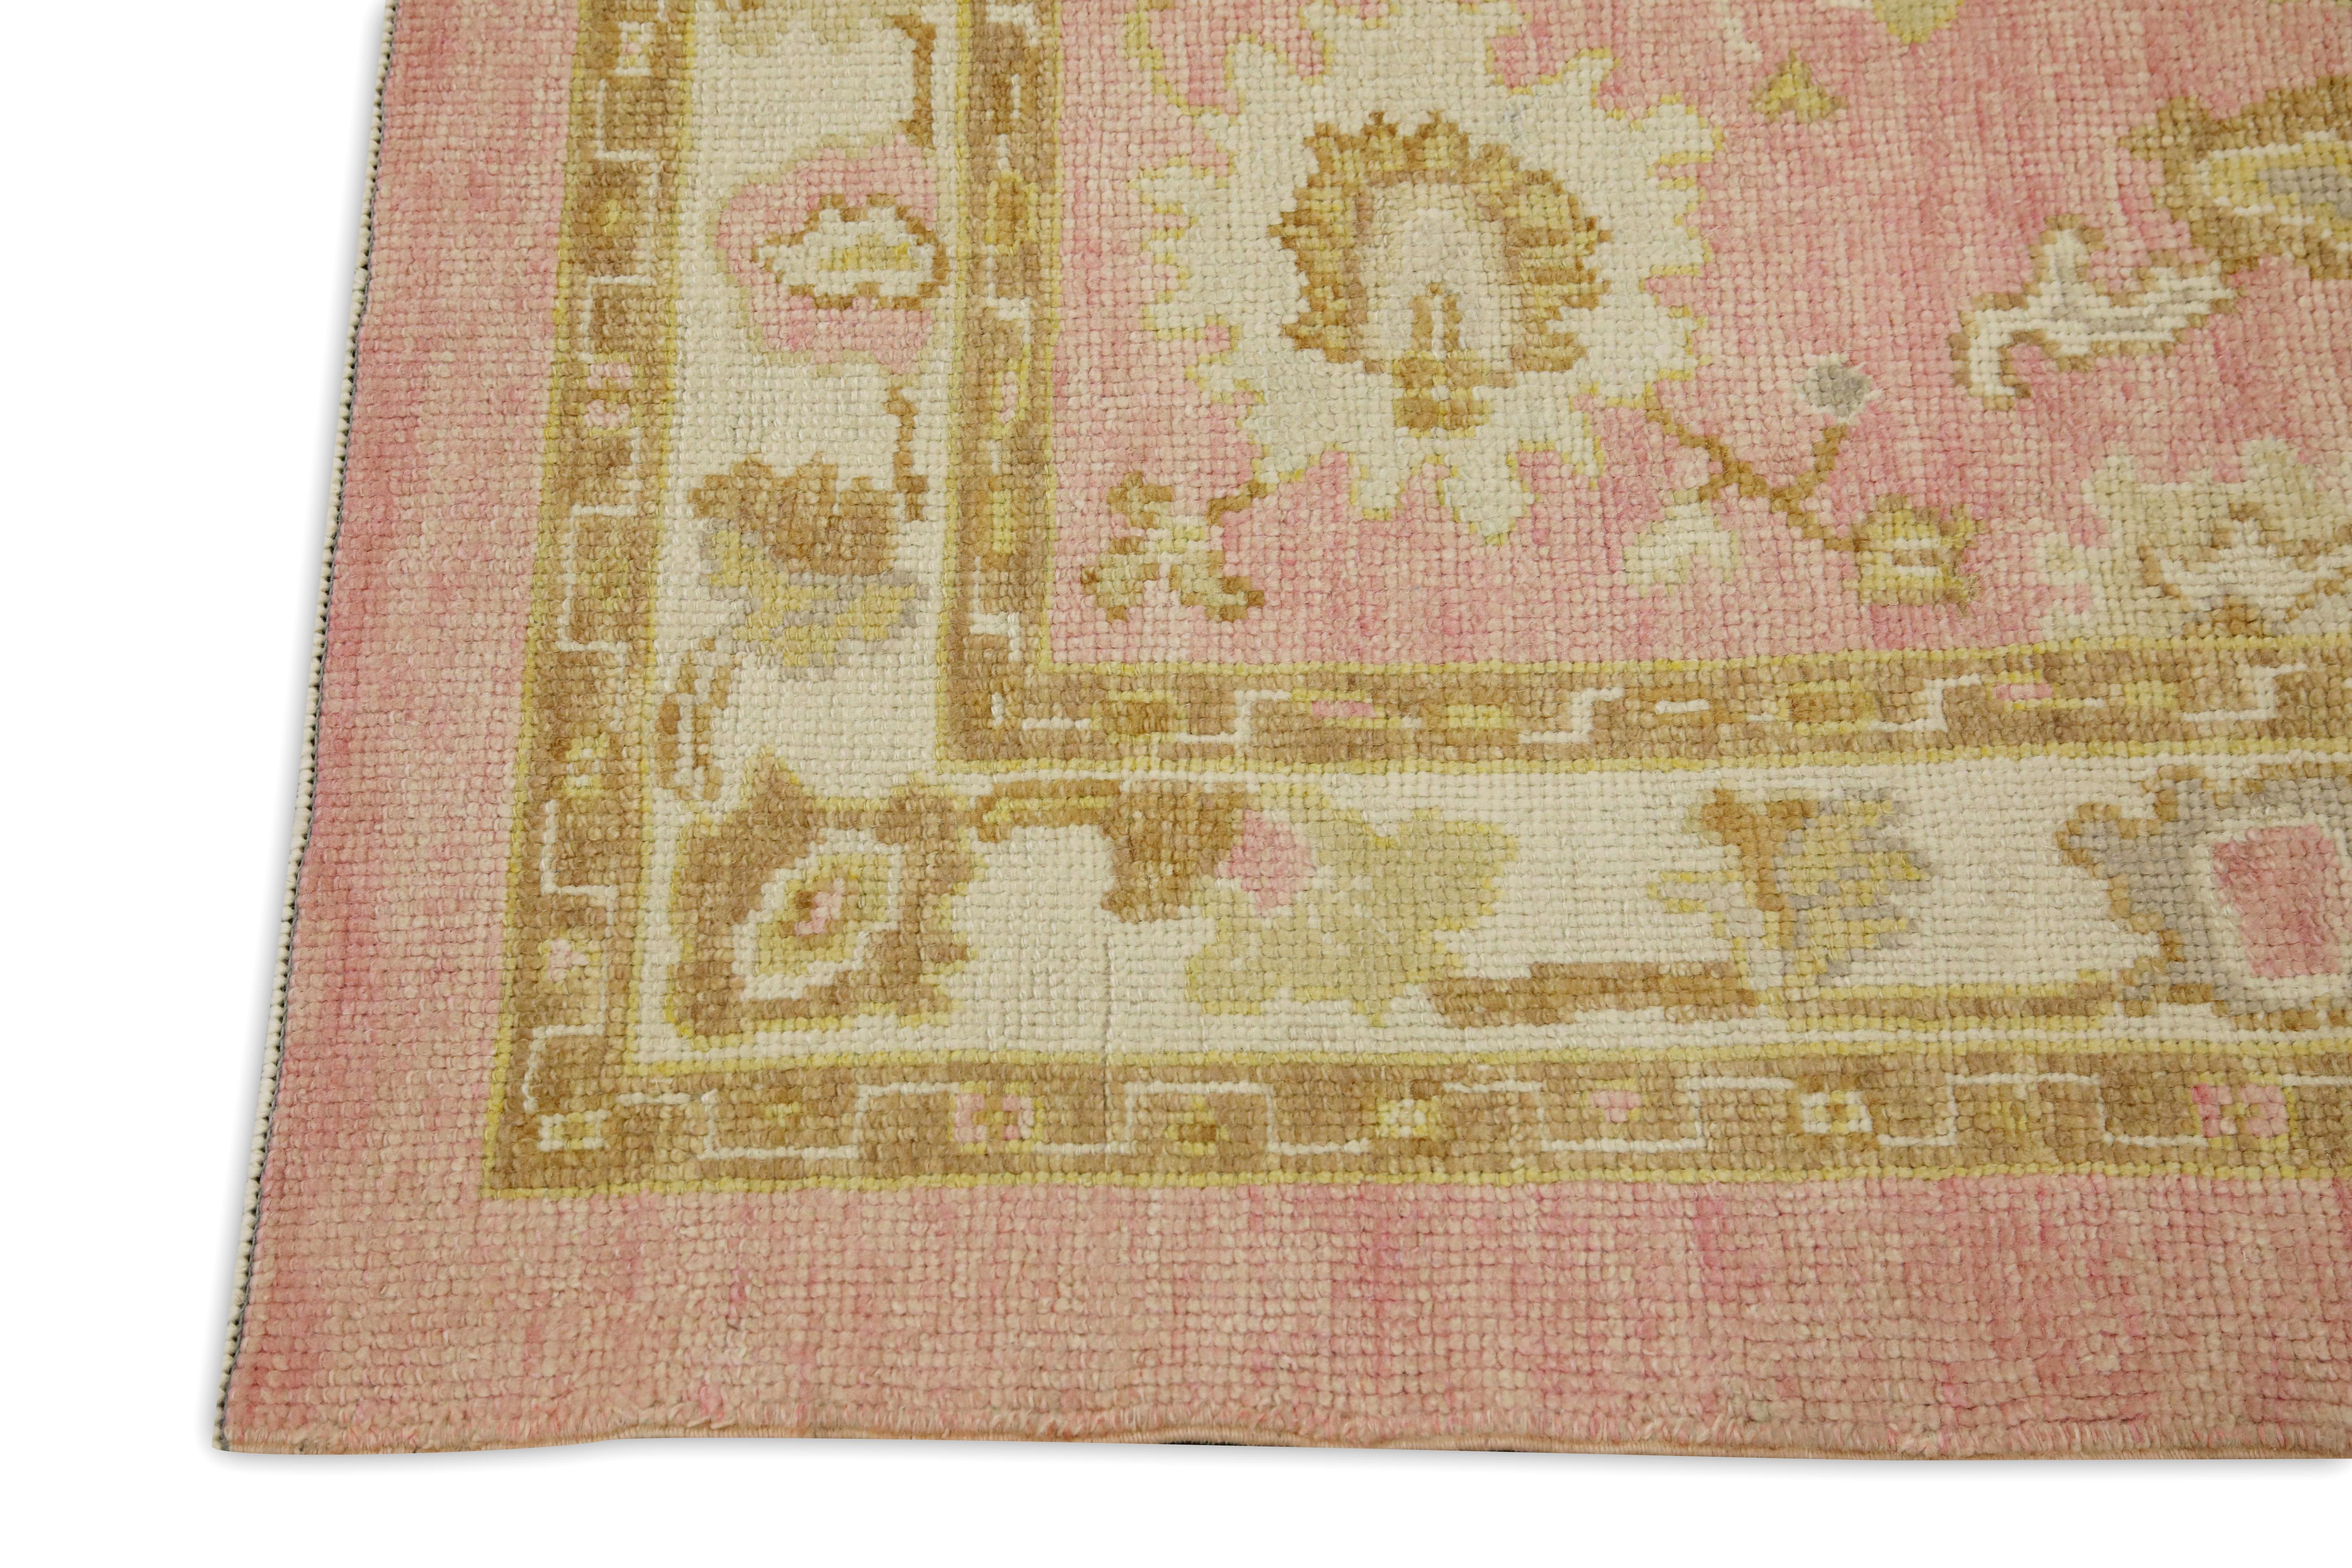 Hand-Woven Pink & Yellow Floral Design Handwoven Wool Turkish Oushak Rug 3' x 4'8